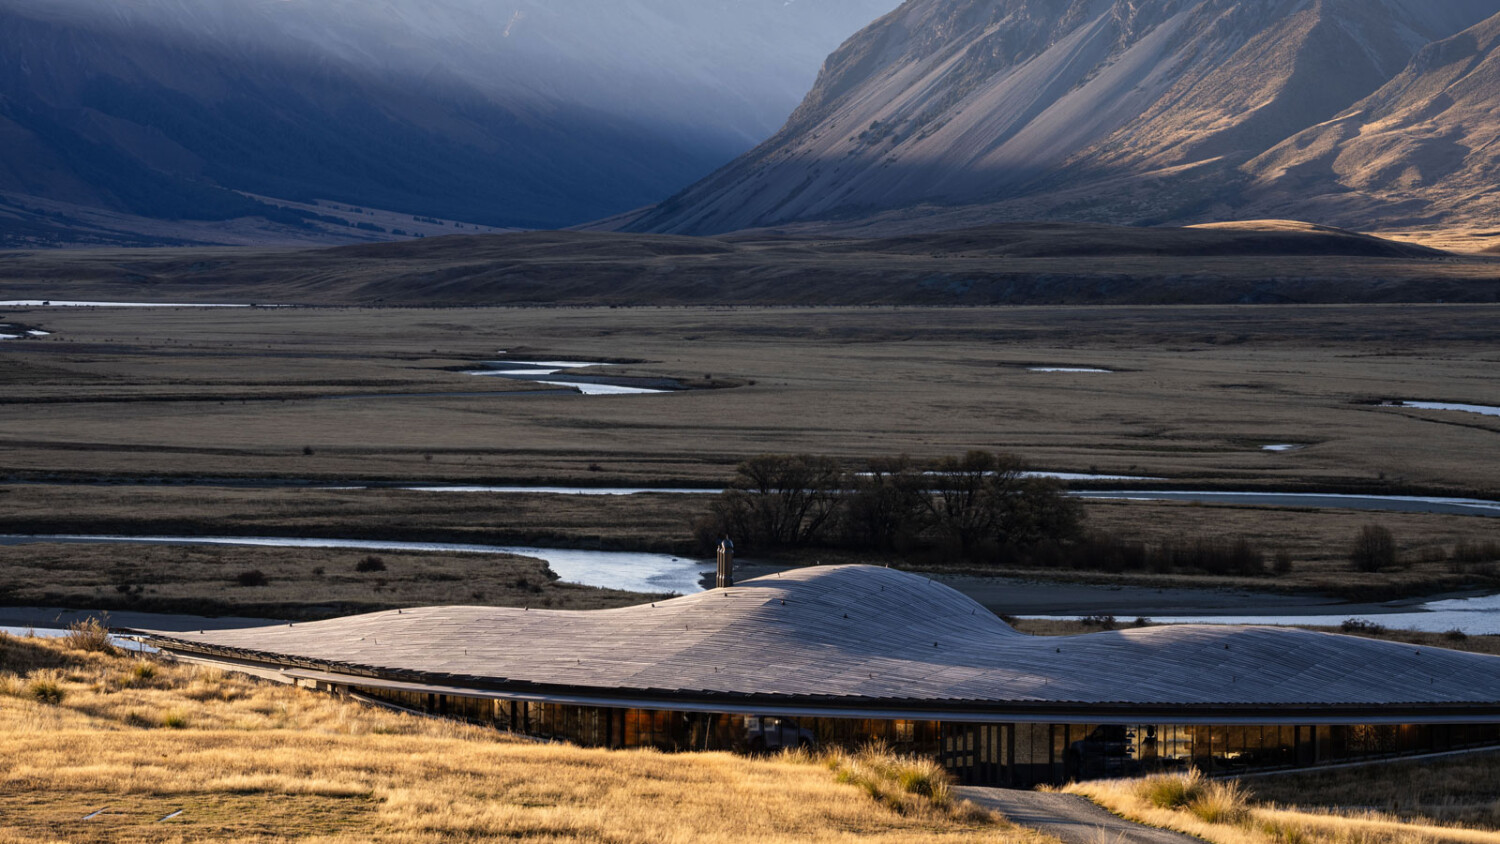 Joe Thomas Takes Us To An Architectural Lodge Nestled In The South Island of New Zealand